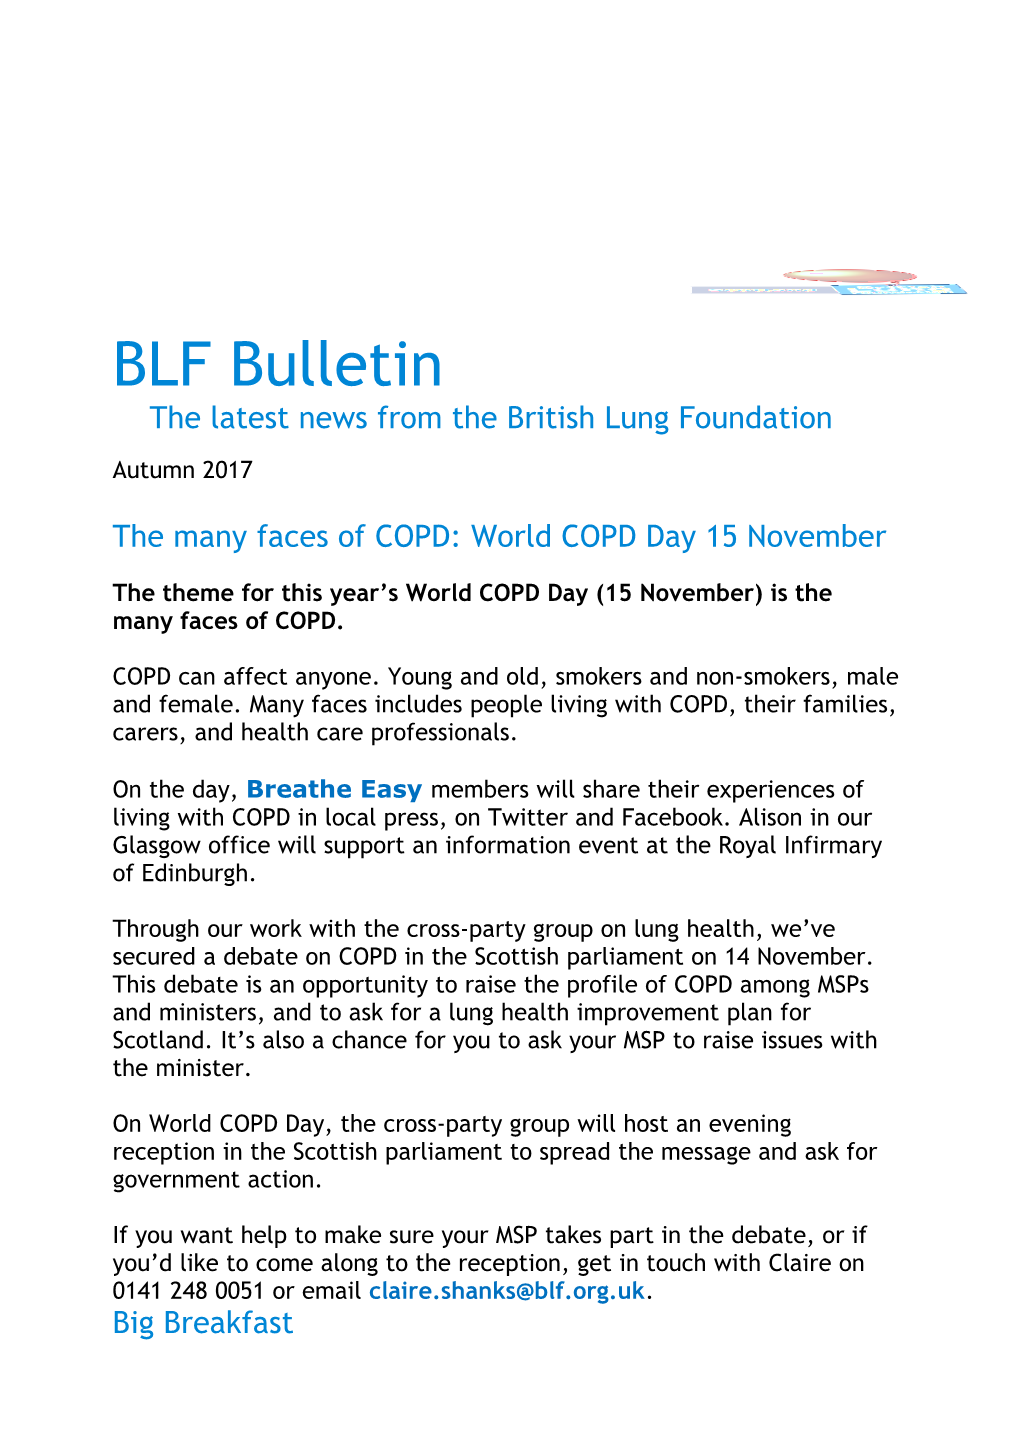 BLF Bulletin the Latest News from the British Lung Foundation